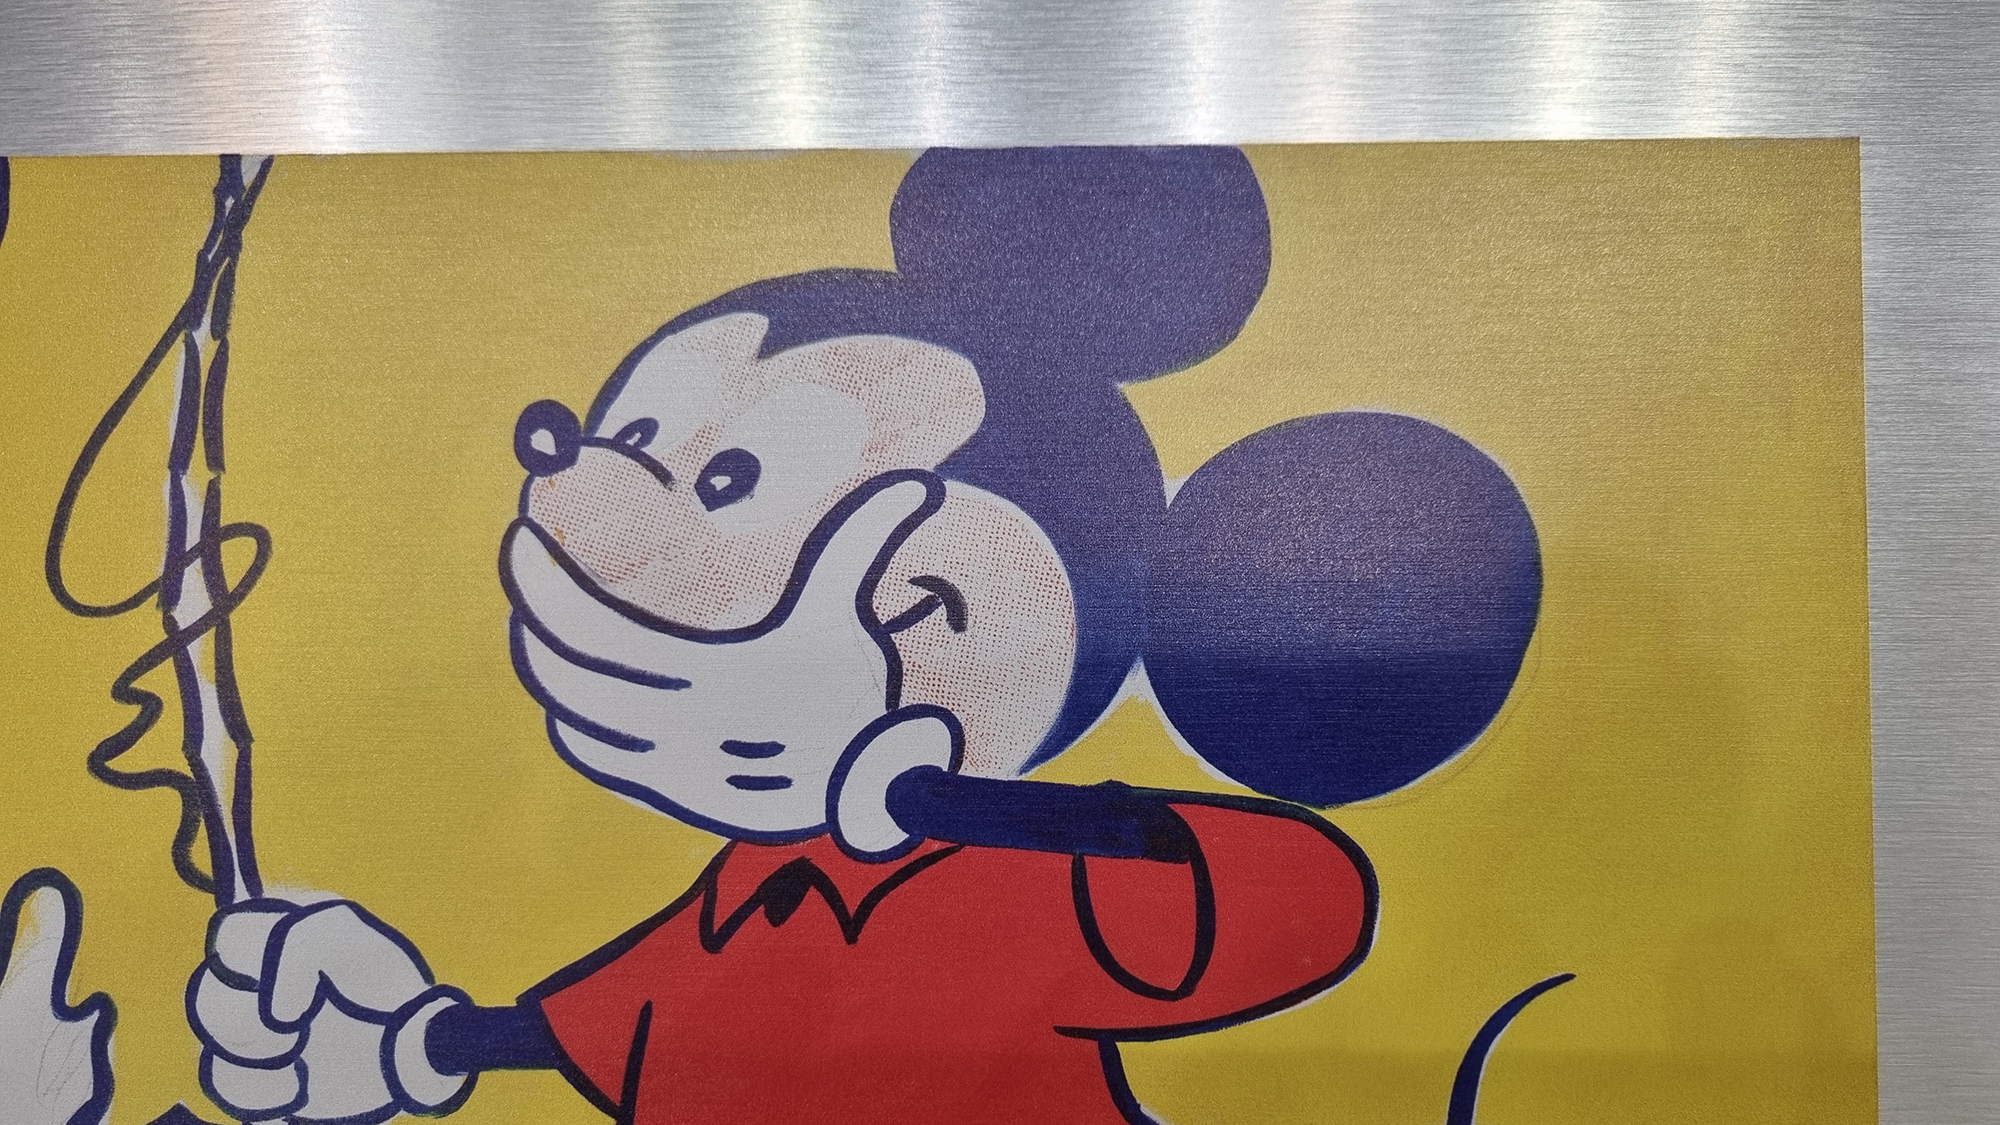 Rare Roy Lichtenstein "Look Mickey, 1961" Limited Edition on Metal. - Image 5 of 6